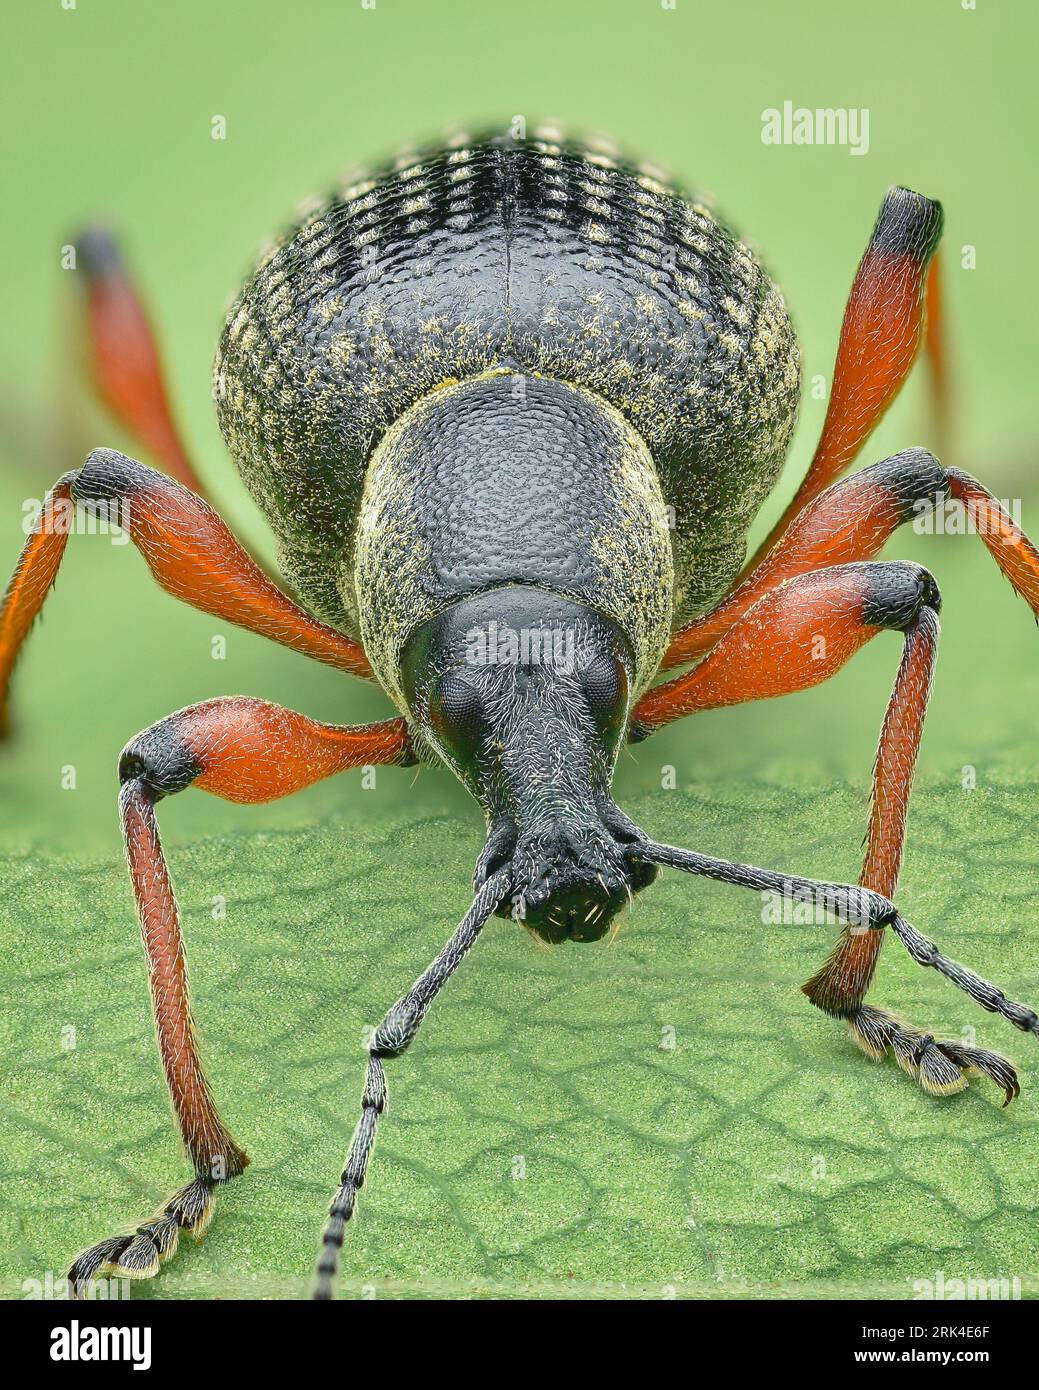 Portrait of a black weevil with orange legs and yellow dust, standing on a green leaf (Otiorhynchus coecus) Stock Photo